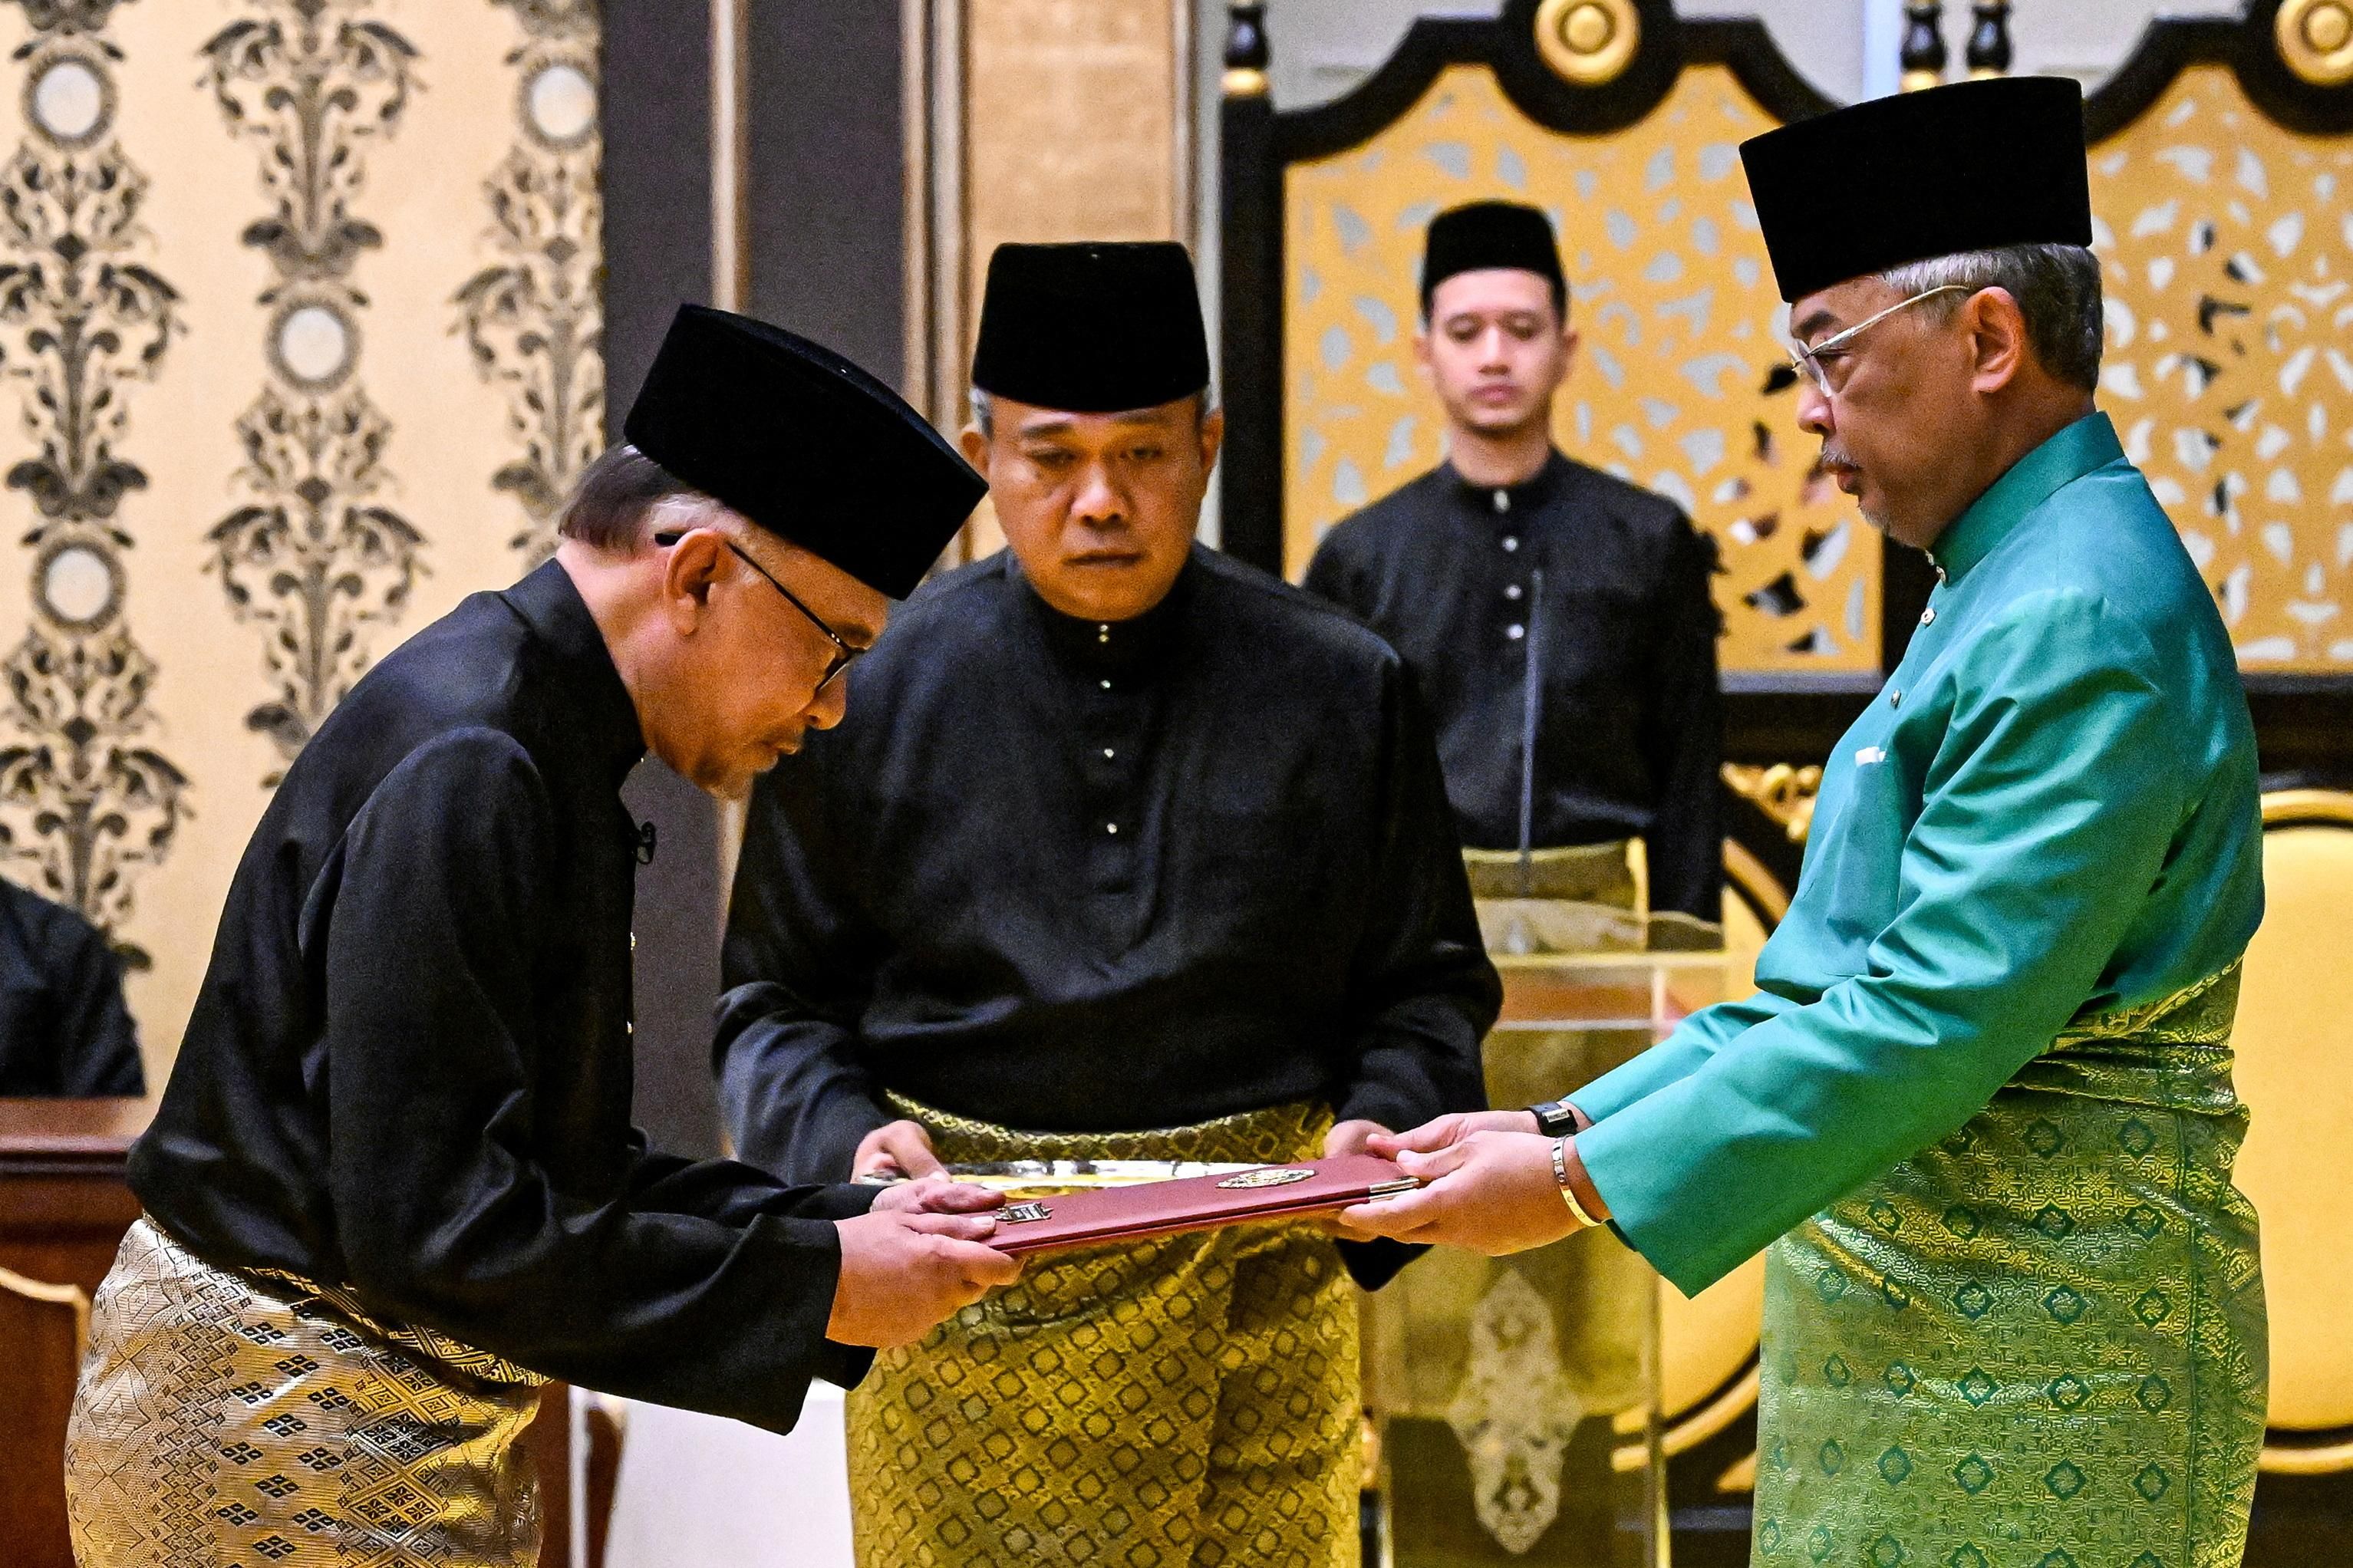 Malaysia's King Sultan Abdullah Sultan Ahmad Shah (R) and newly appointed Prime Minister Anwar Ibrahim (L) take part in the swearing-in ceremony in Kuala Lumpur.